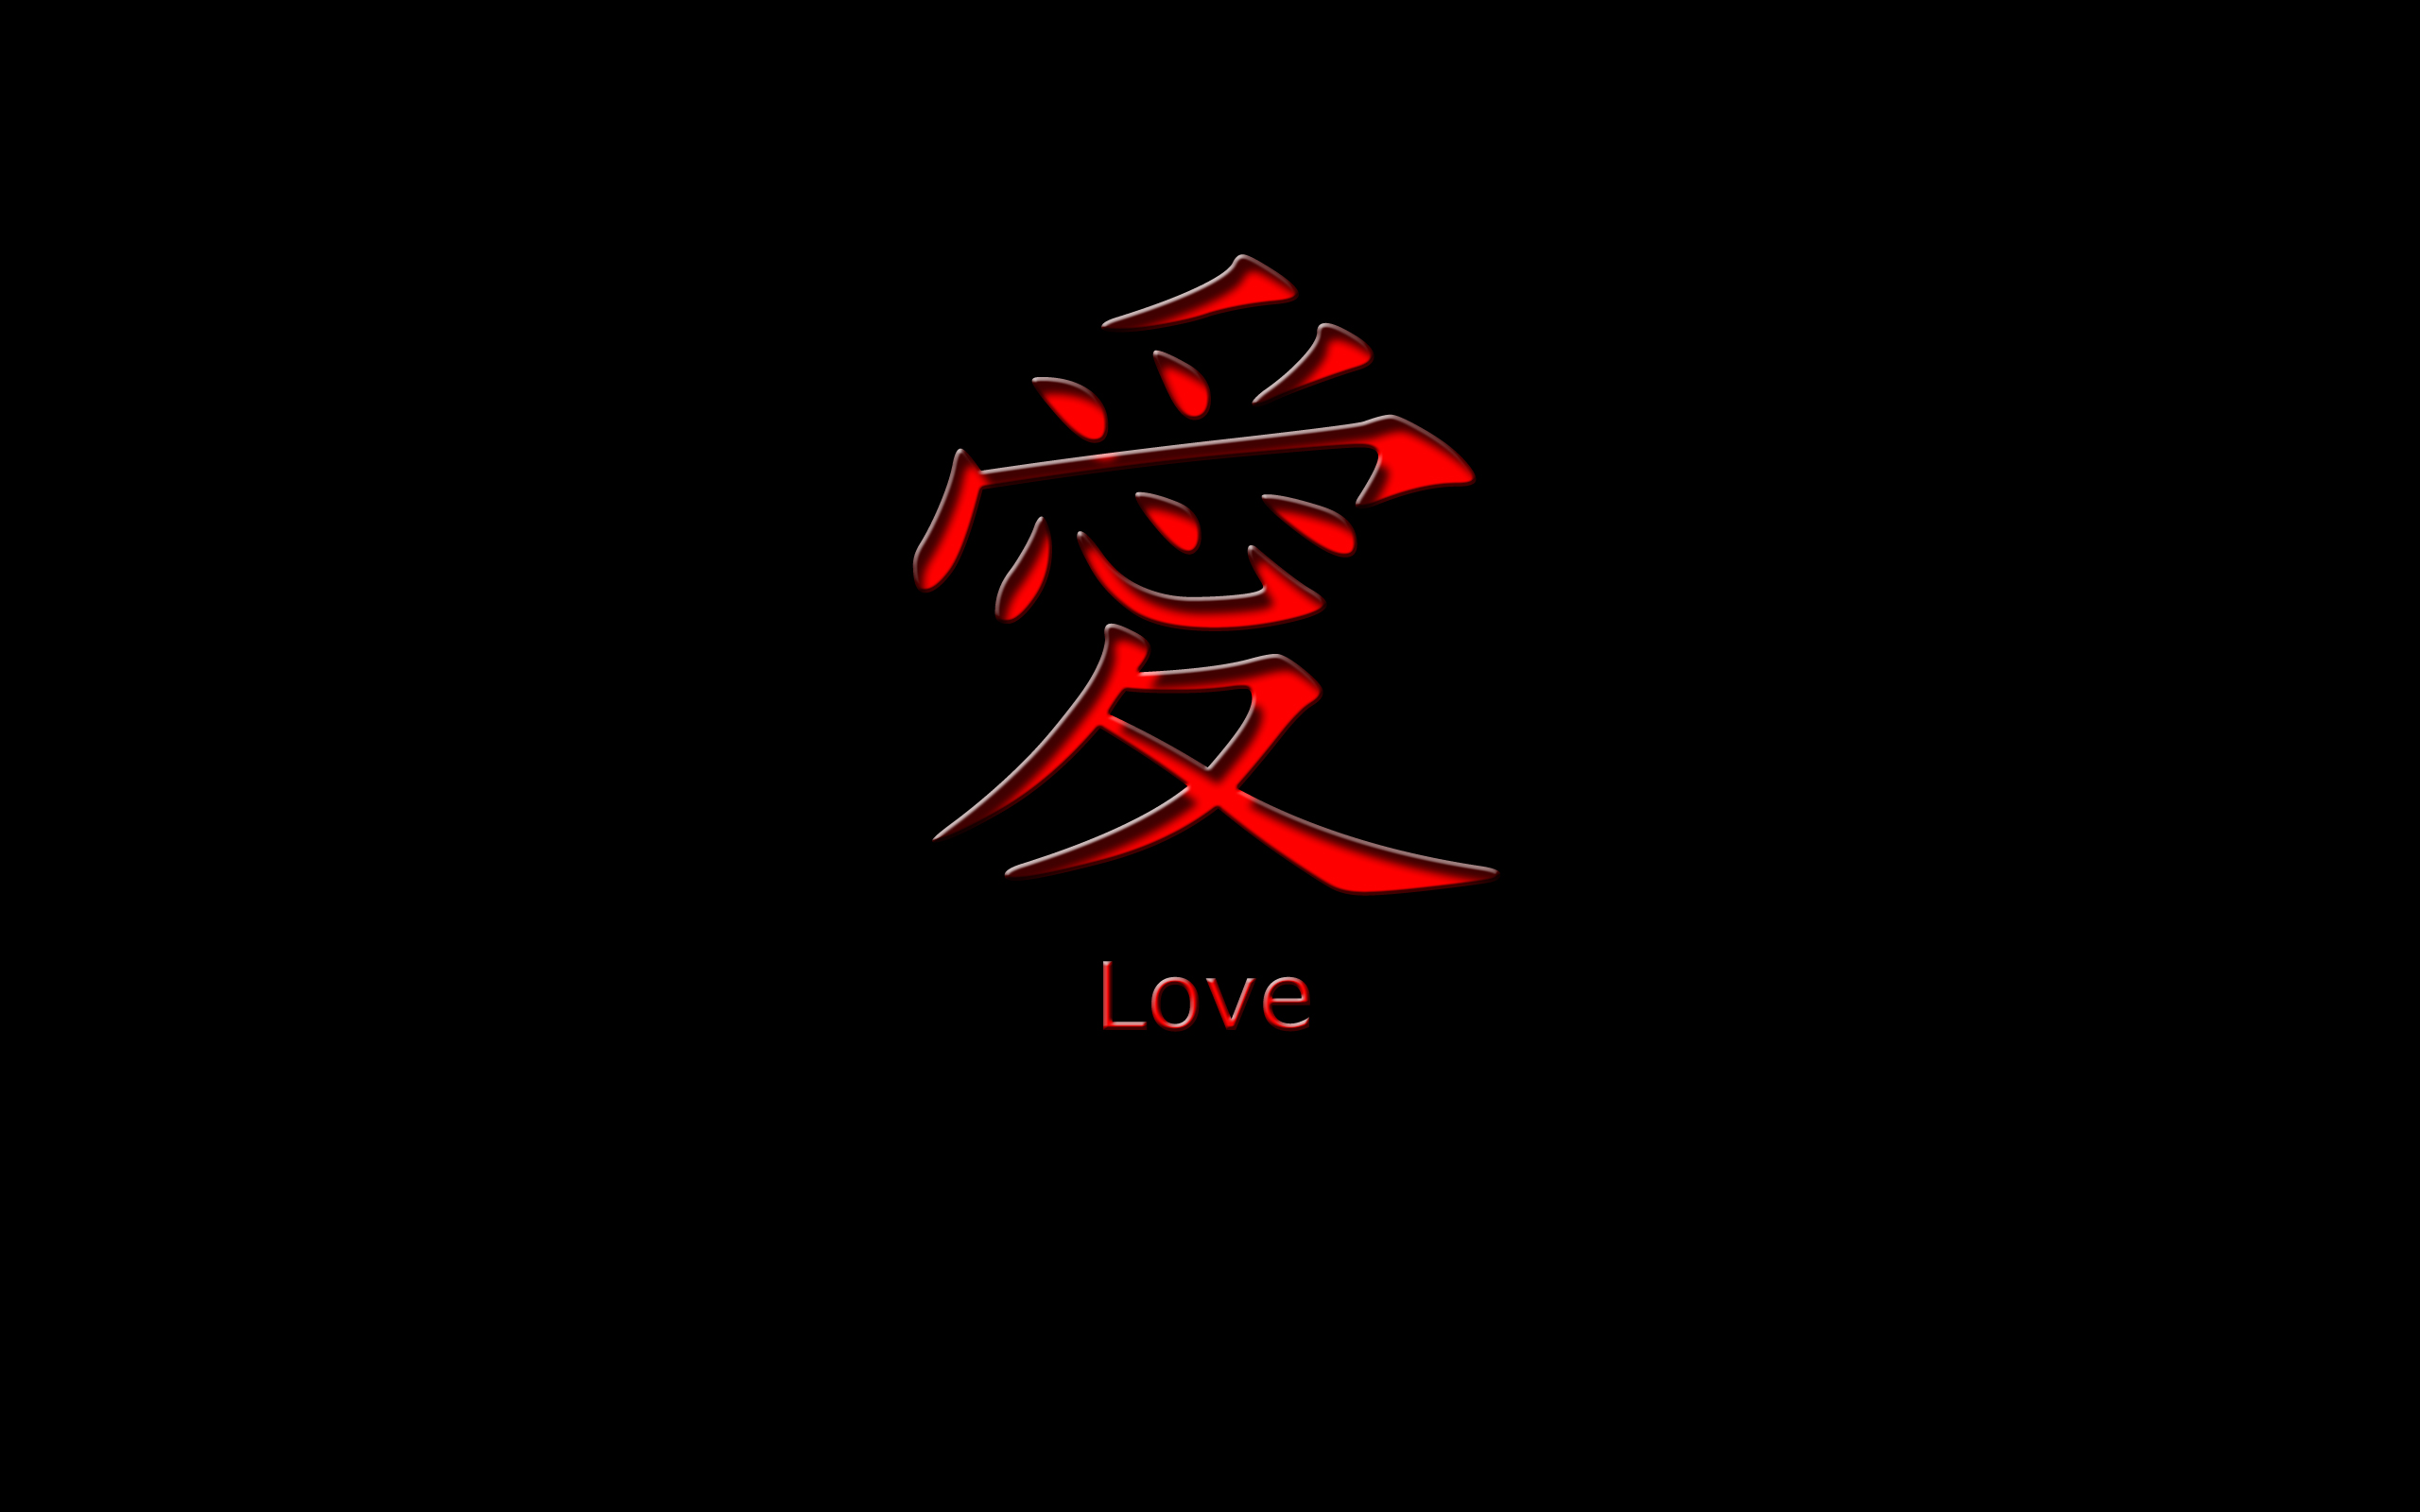 Wallpaper 26 Love Red and Black Wallpapers